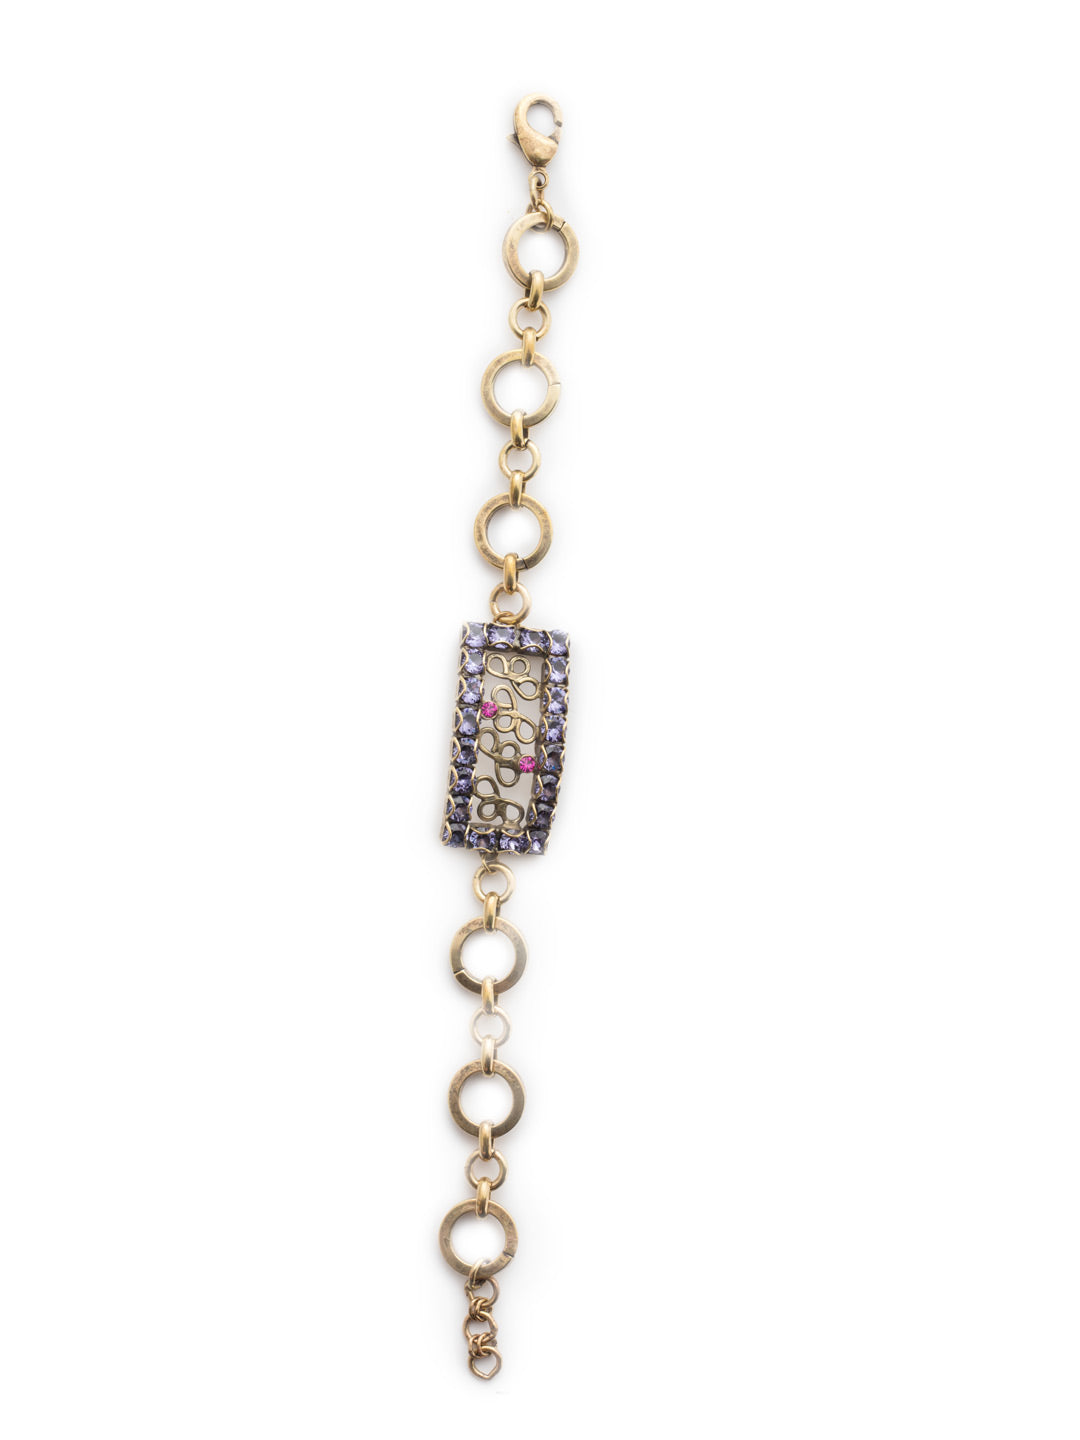 Ornella Tennis Bracelet - BES1AGDCS - <p>Wear the Ornella Tennis Bracelet with everyday fashions to take them up a notch. The hand-soldered metal detail at its center is rimmed with sparkling crystals for a stand-out effect. From Sorrelli's Duchess collection in our Antique Gold-tone finish.</p>